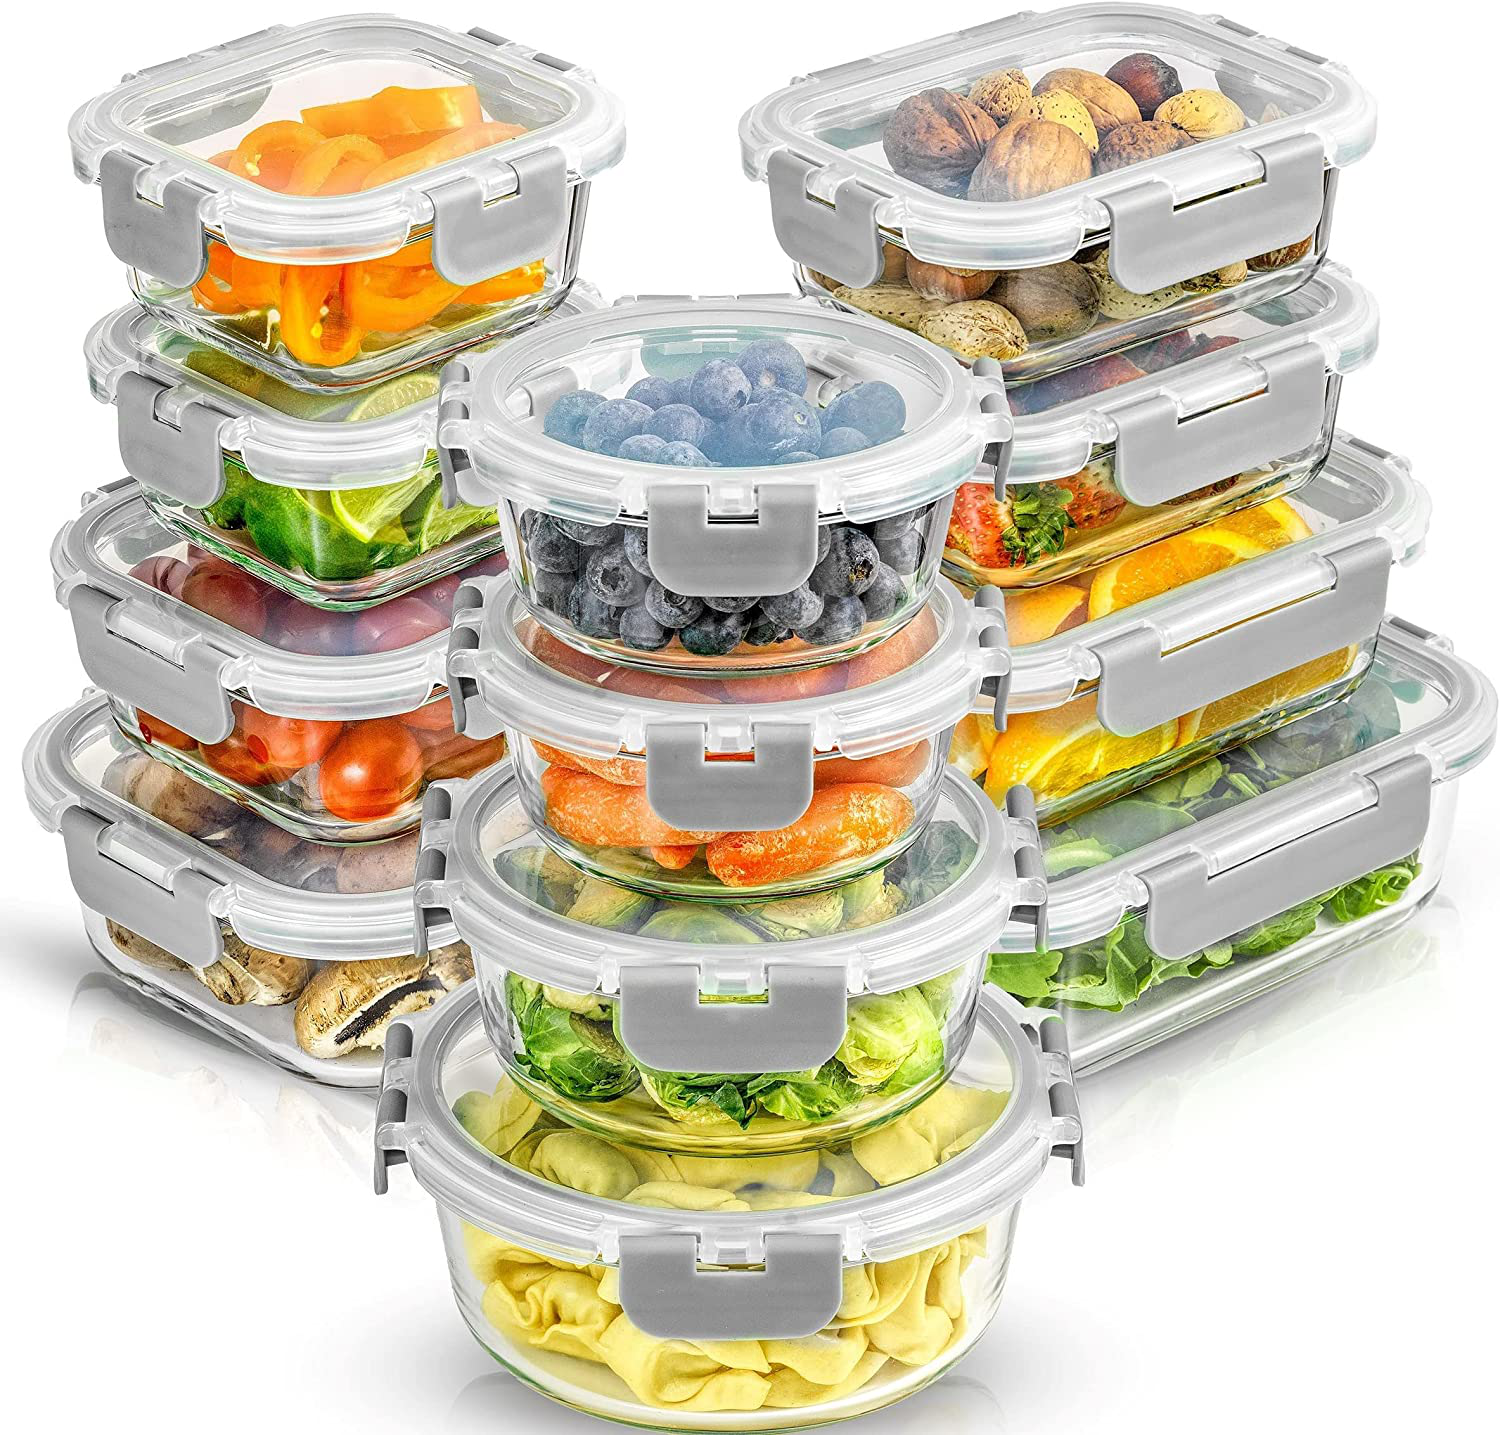  Utopia Kitchen Plastic Food Storage Container Set with Airtight  Lids - Pack of 18 (9 Containers & 9 Snap Lids) - Reusable & Leftover Food  Lunch Boxes - Leak Proof, Freezer